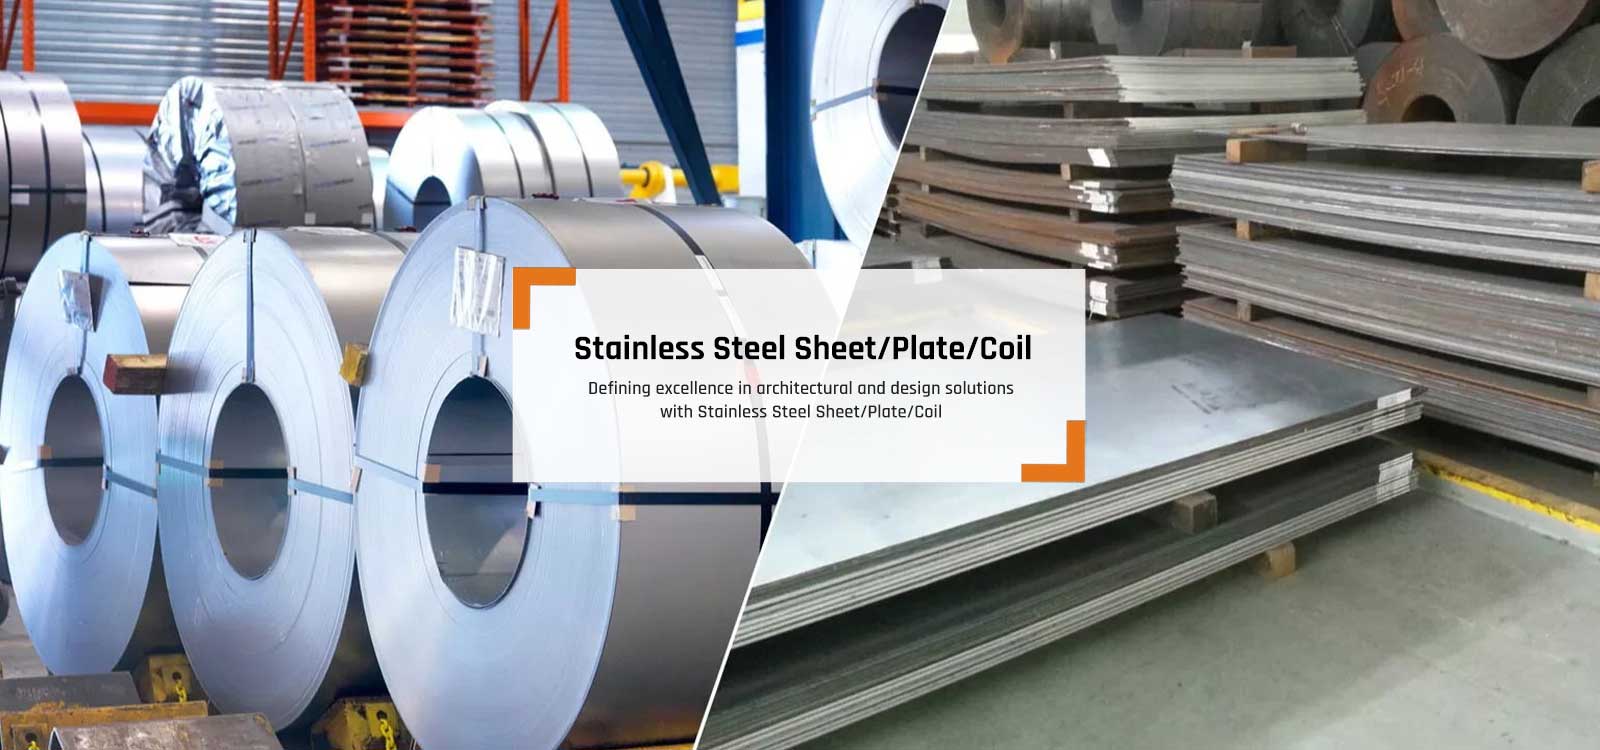 Stainless Steel Sheet Plates Coils Manufacturers in Bihar